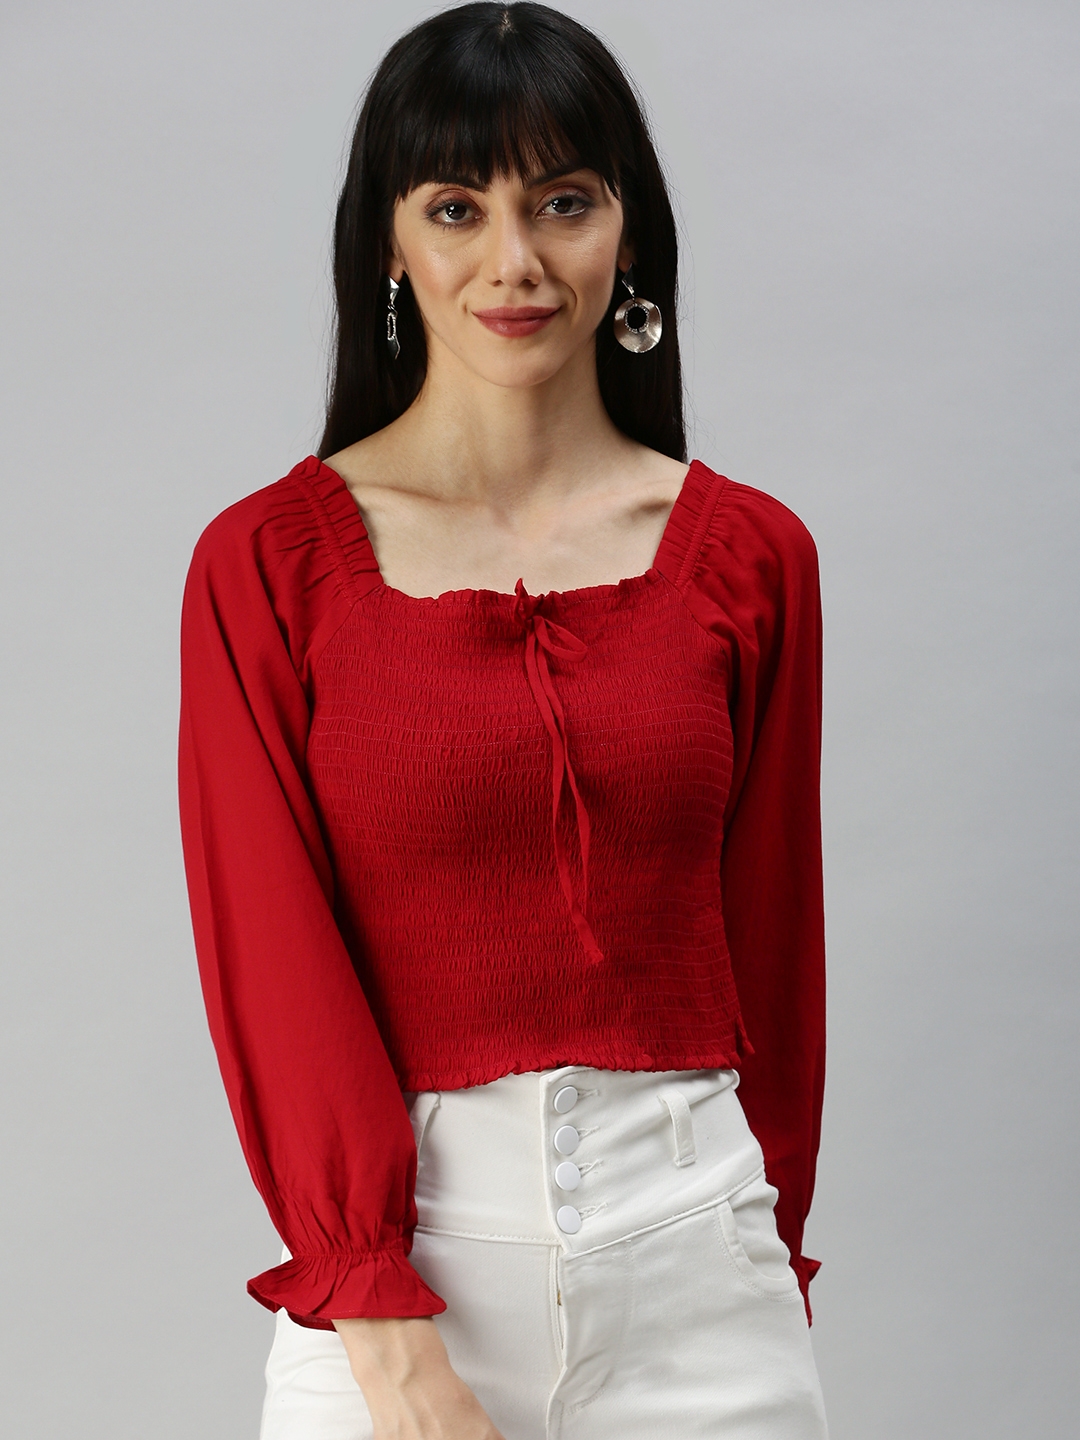 SHOWOFF Women's Square Neck Solid Red Crop Top